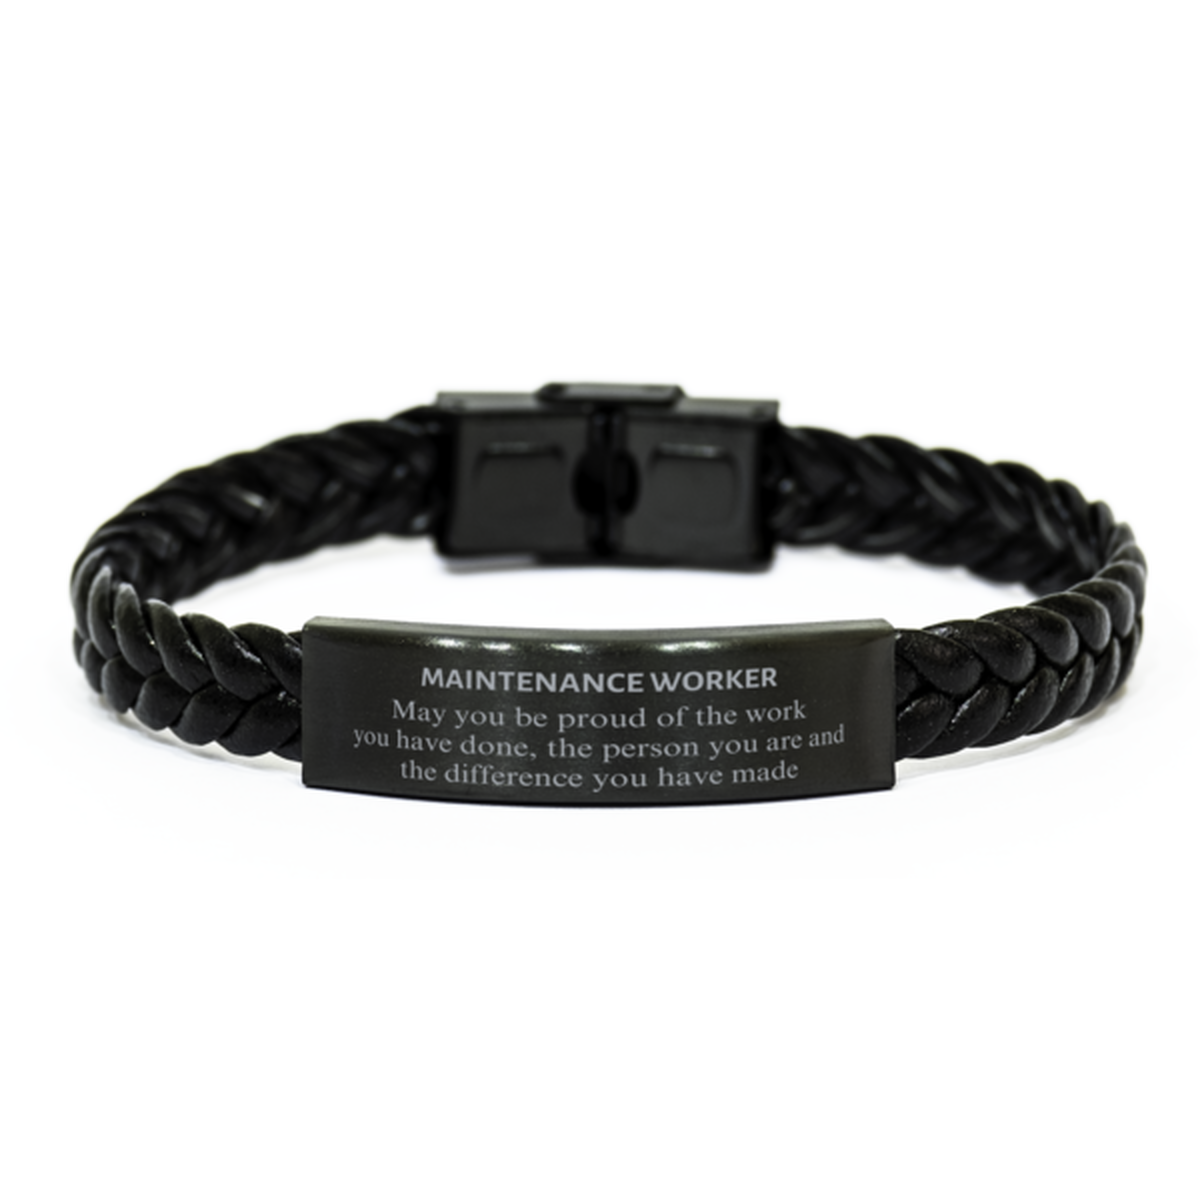 Maintenance Worker May you be proud of the work you have done, Retirement Maintenance Worker Braided Leather Bracelet for Colleague Appreciation Gifts Amazing for Maintenance Worker